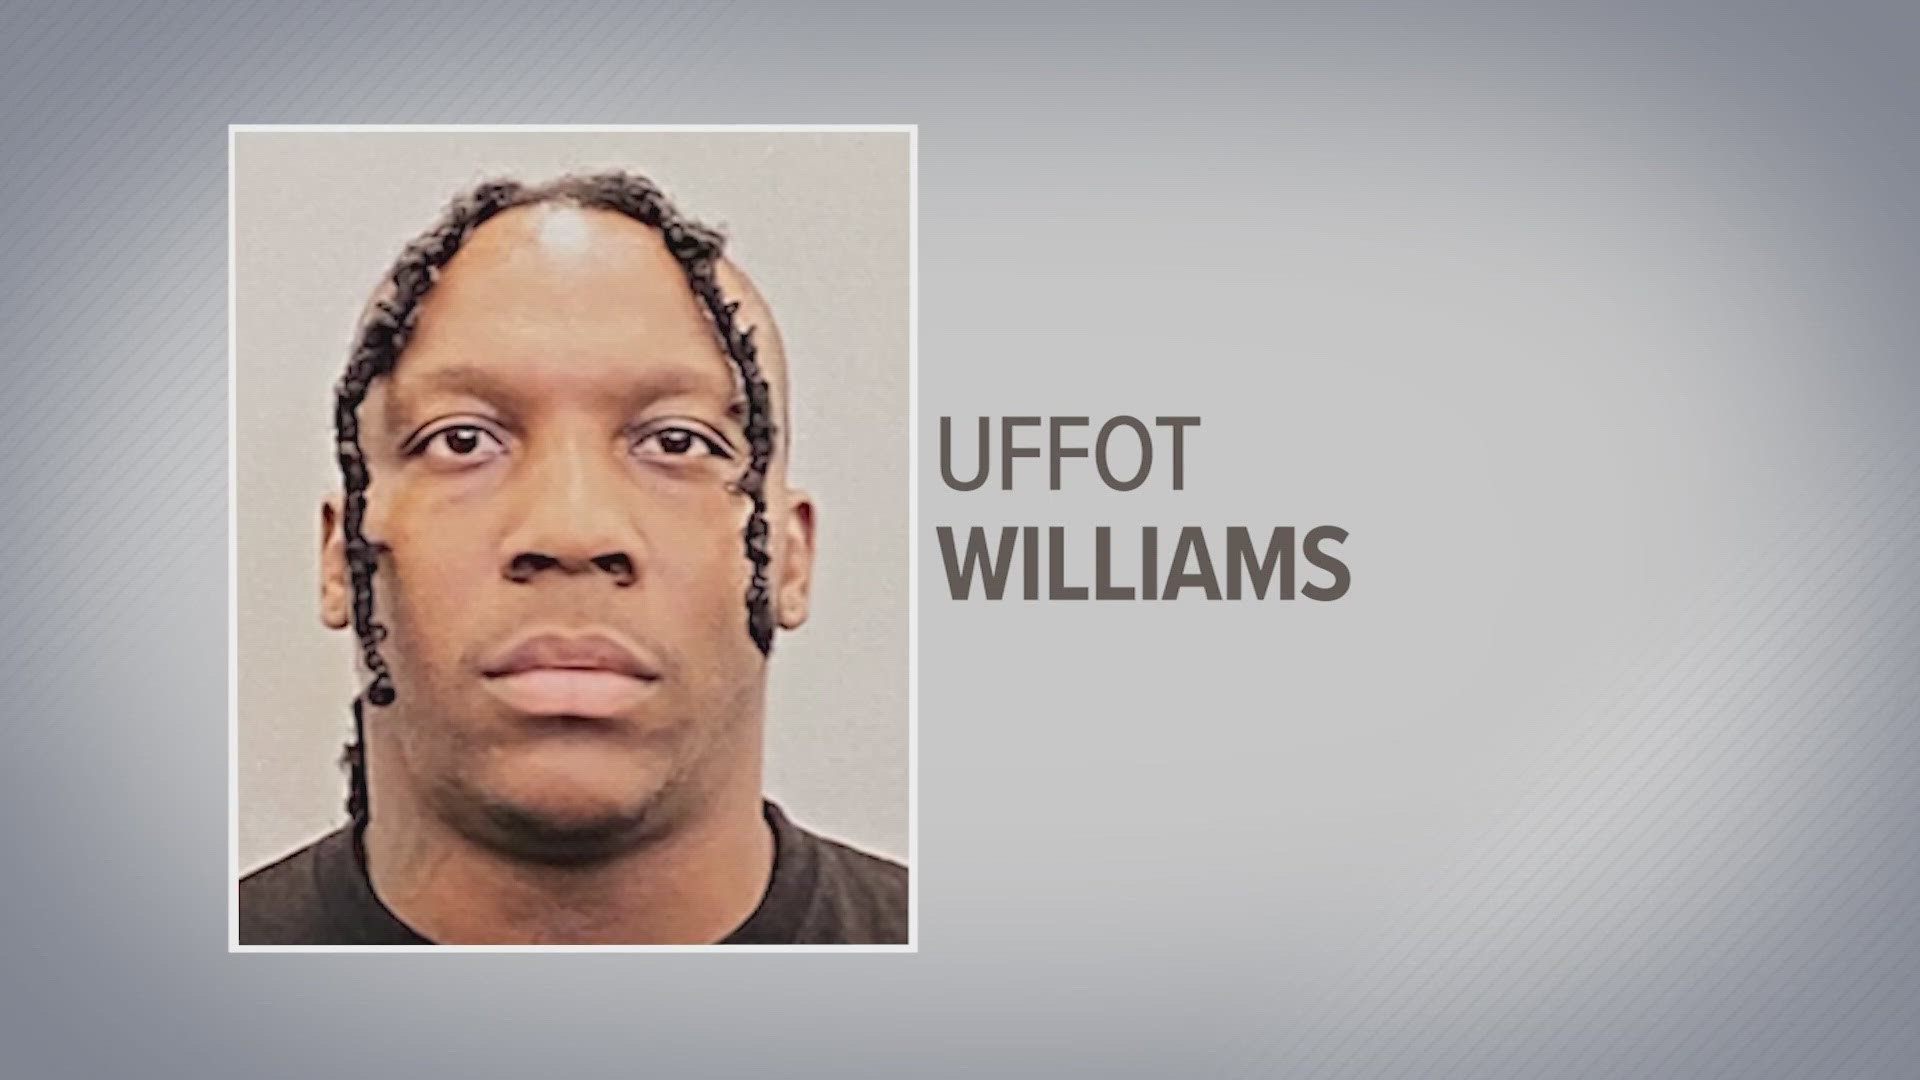 Uffot Williams, 31, is charged with three counts of sexual assault and HPD believes there may be other victims.